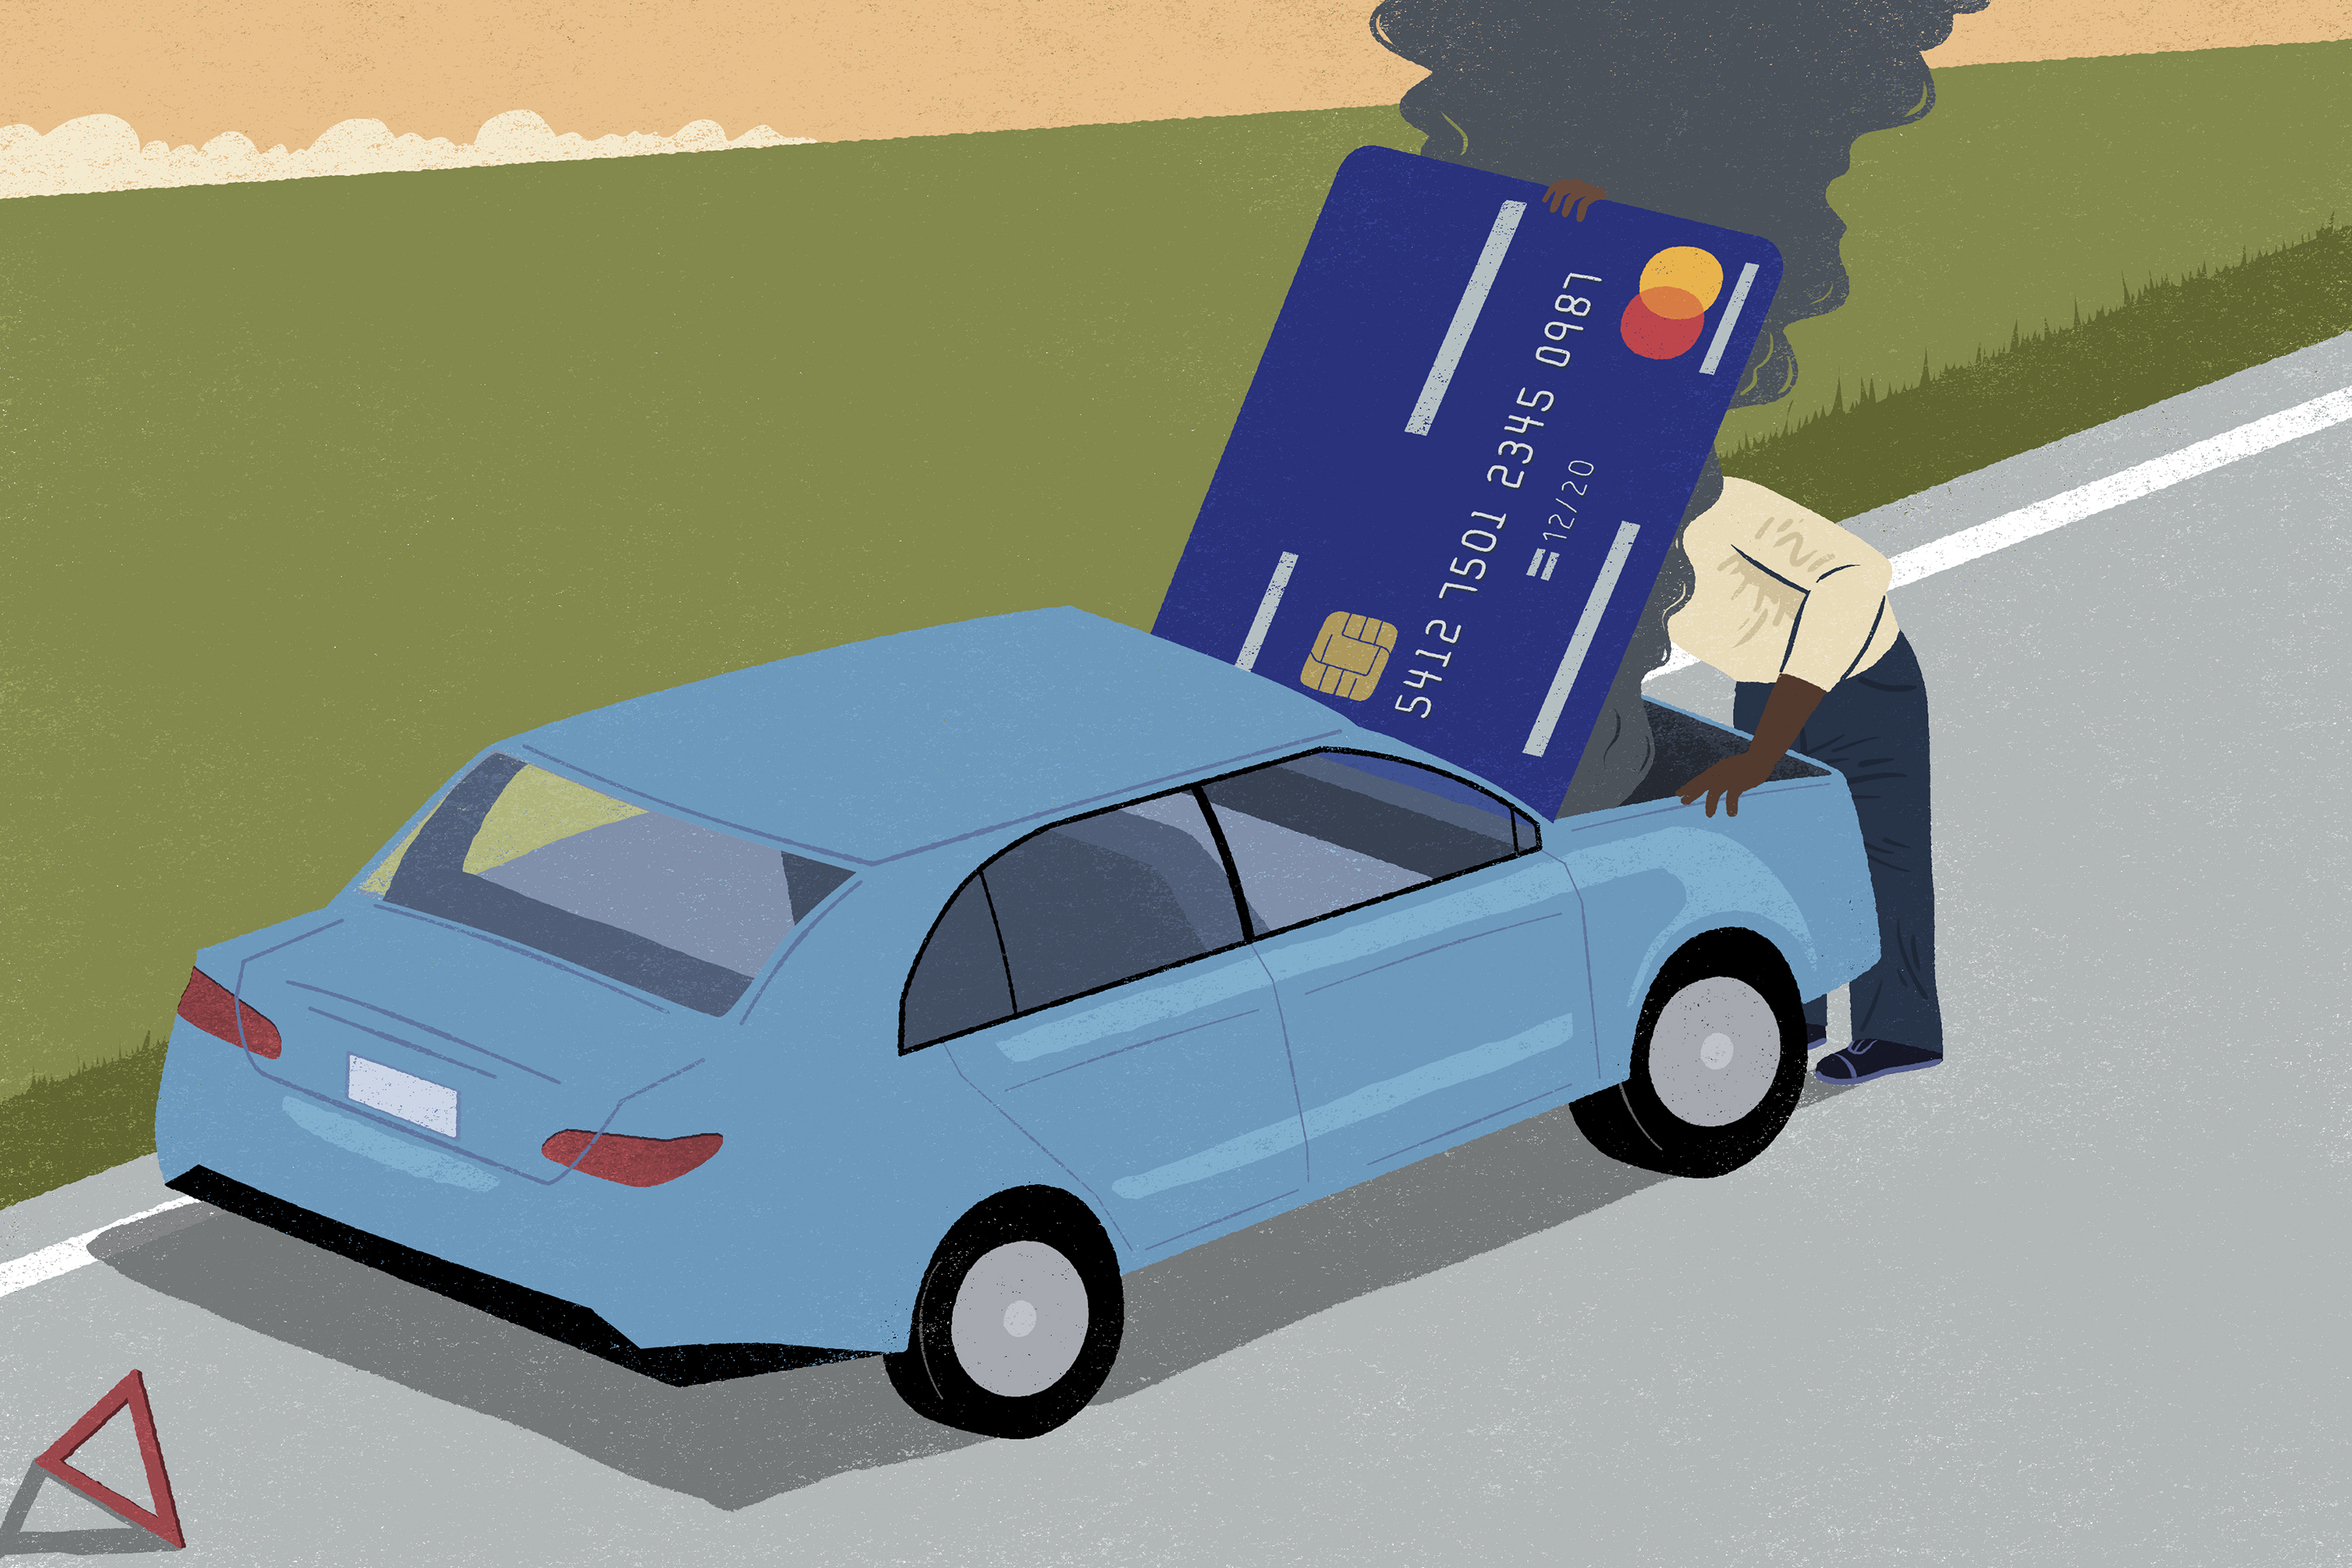 Rental Car Insurance: What Your Credit Card Covers — and What It Doesn't